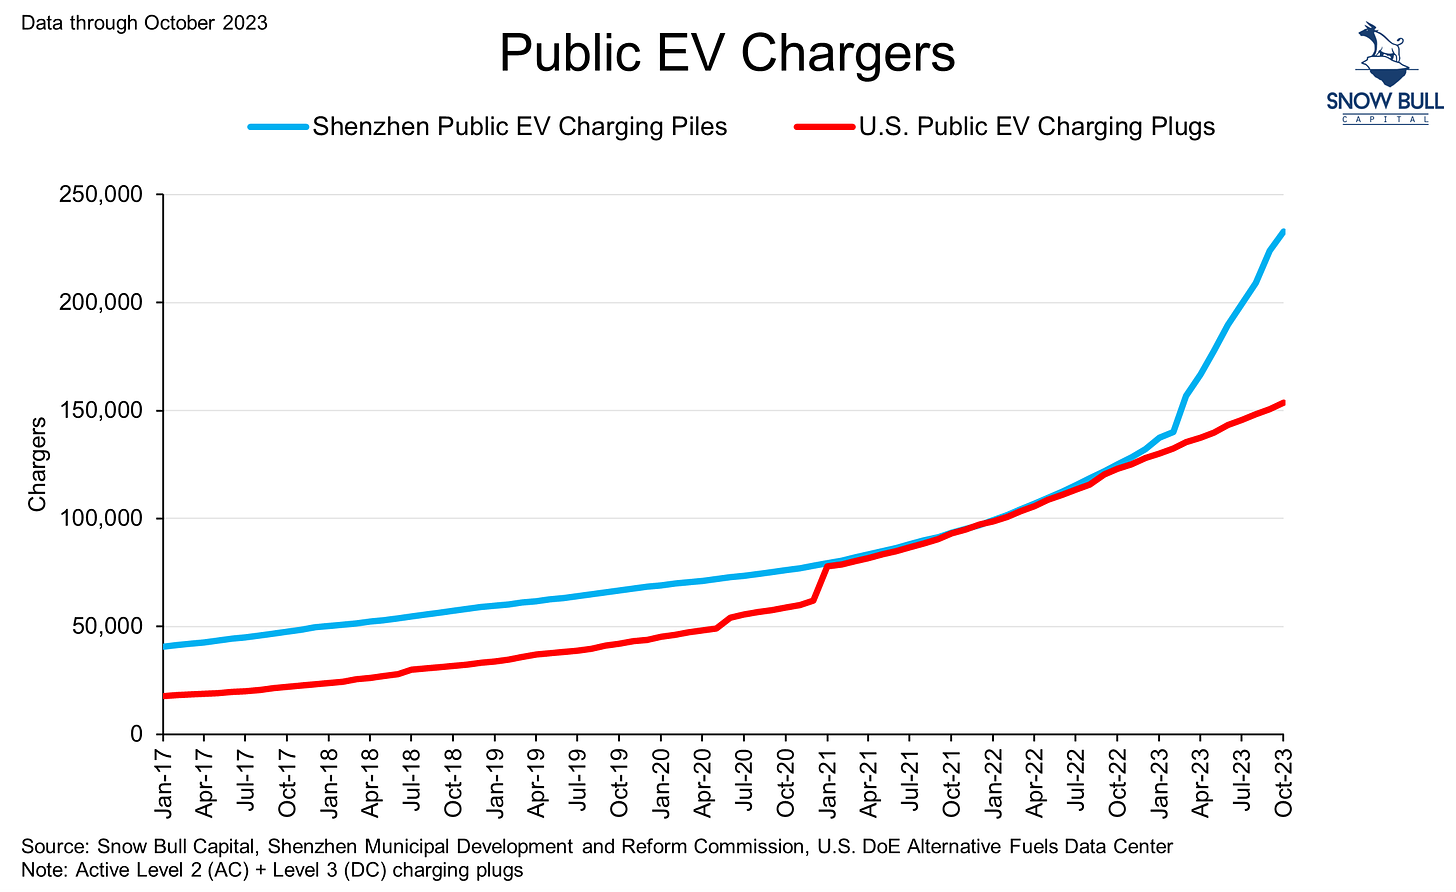 Line graph comparing the number of public EV chargers in Shenzhen versus the entire U.S. from January 2017 to October 2023. Shenzhen's line shows a steep increase, significantly outpacing the U.S. in 2023.